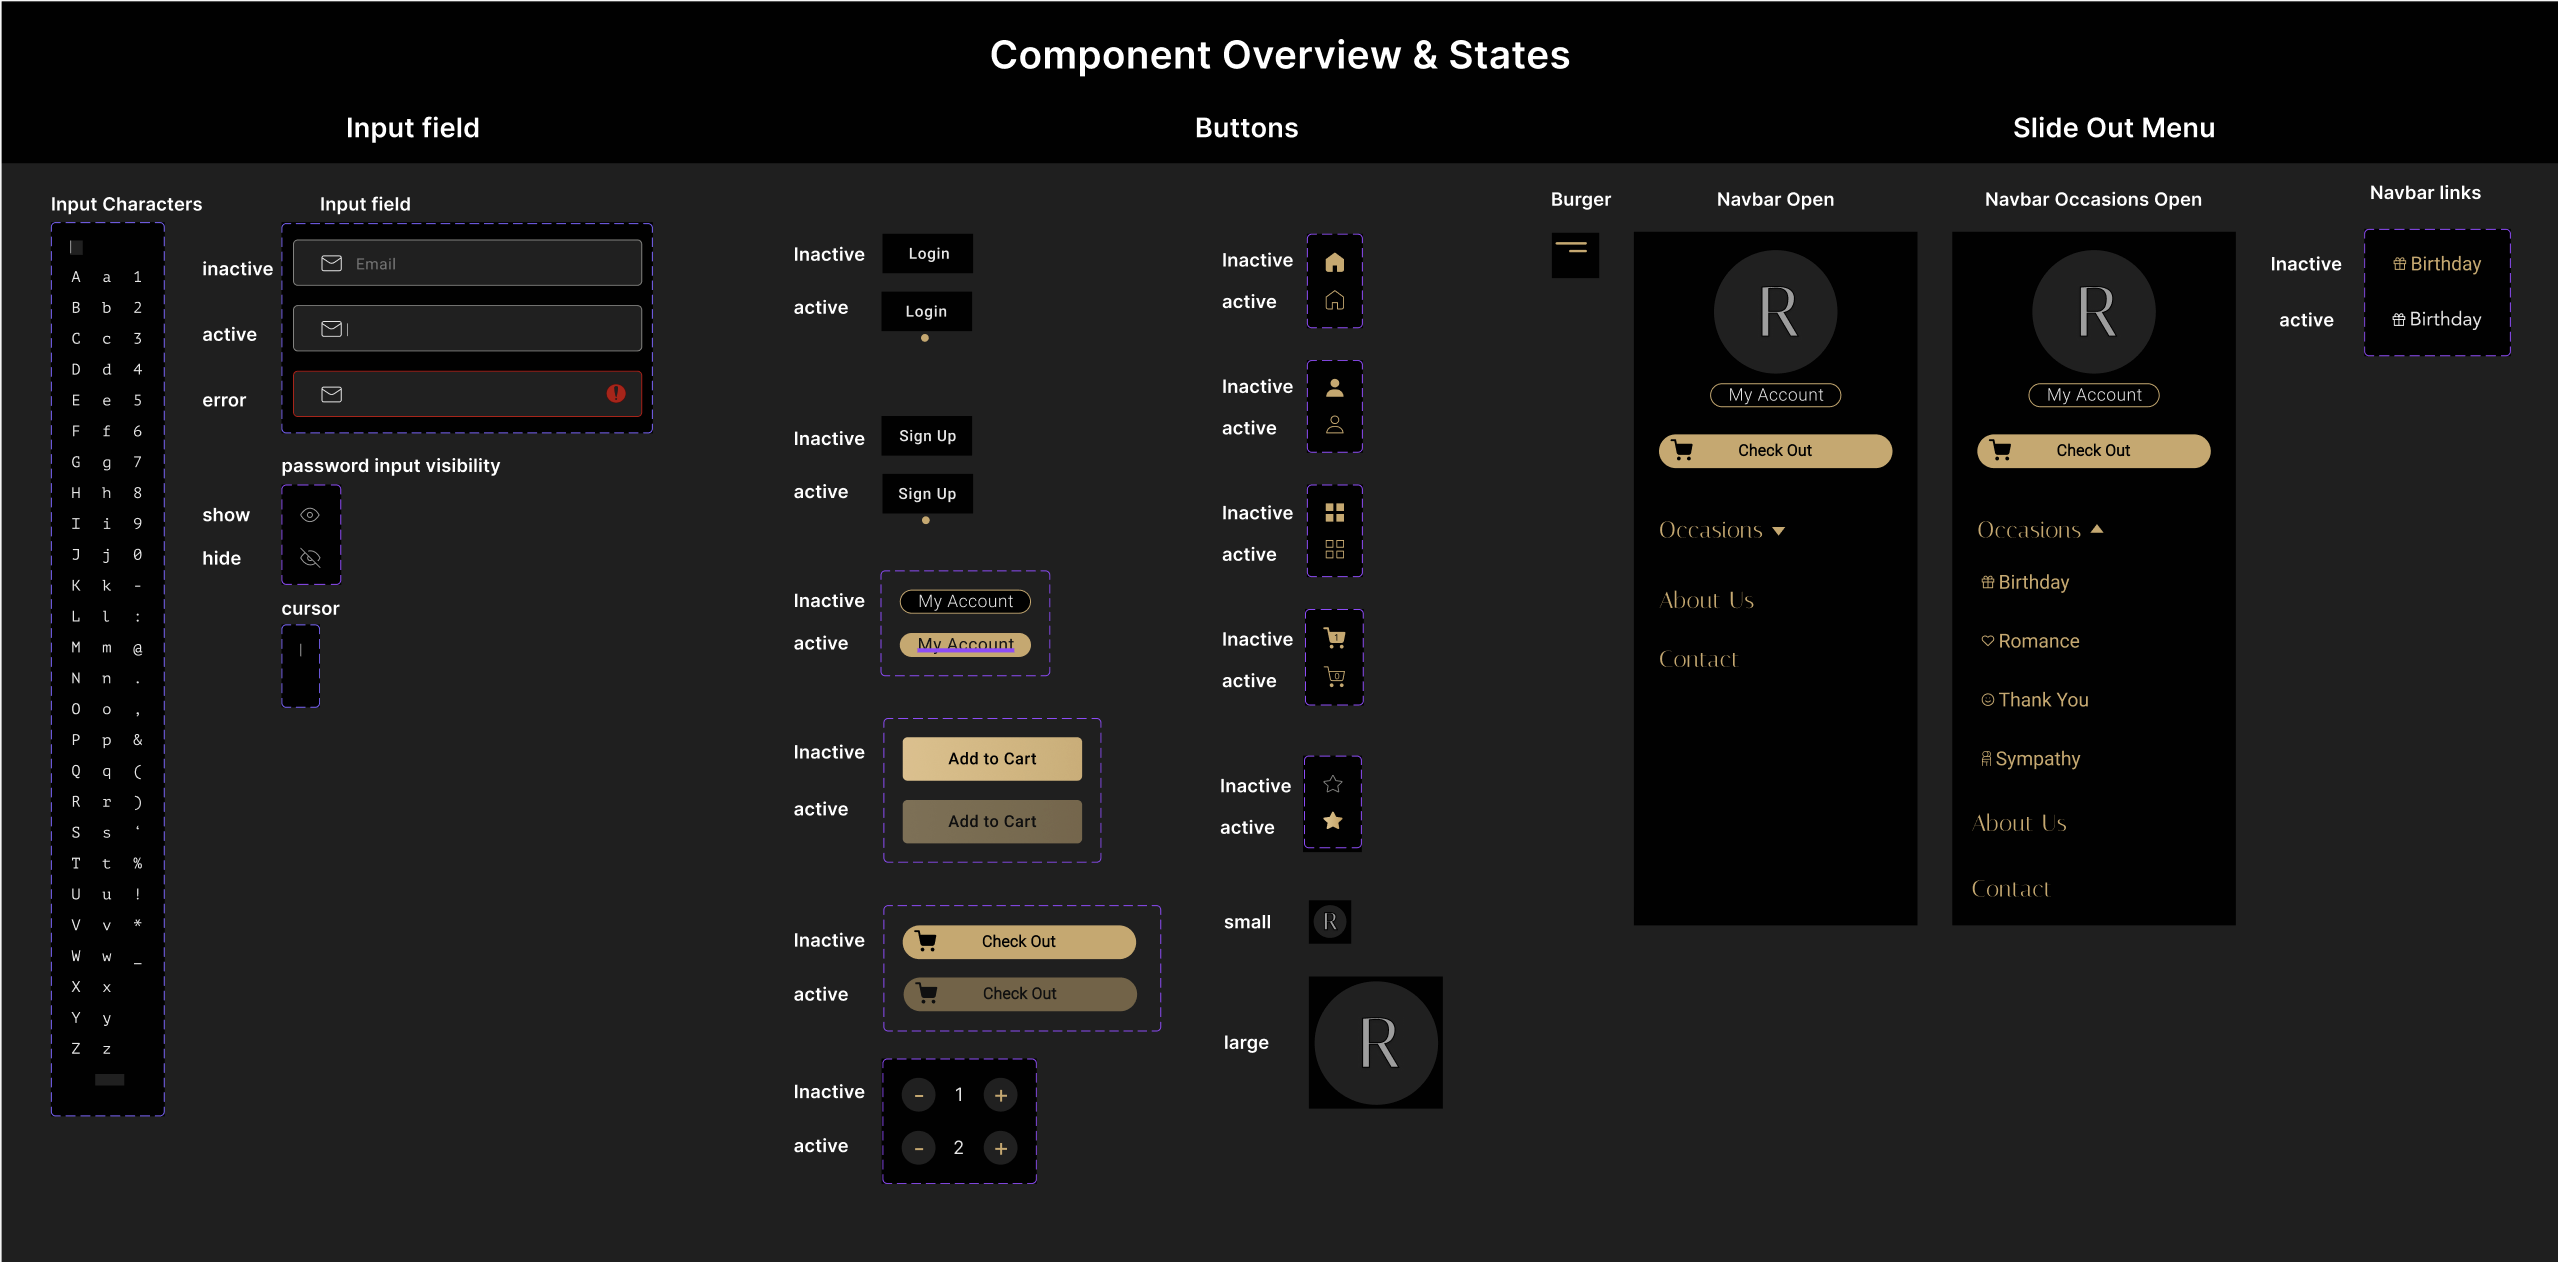 Component Overview